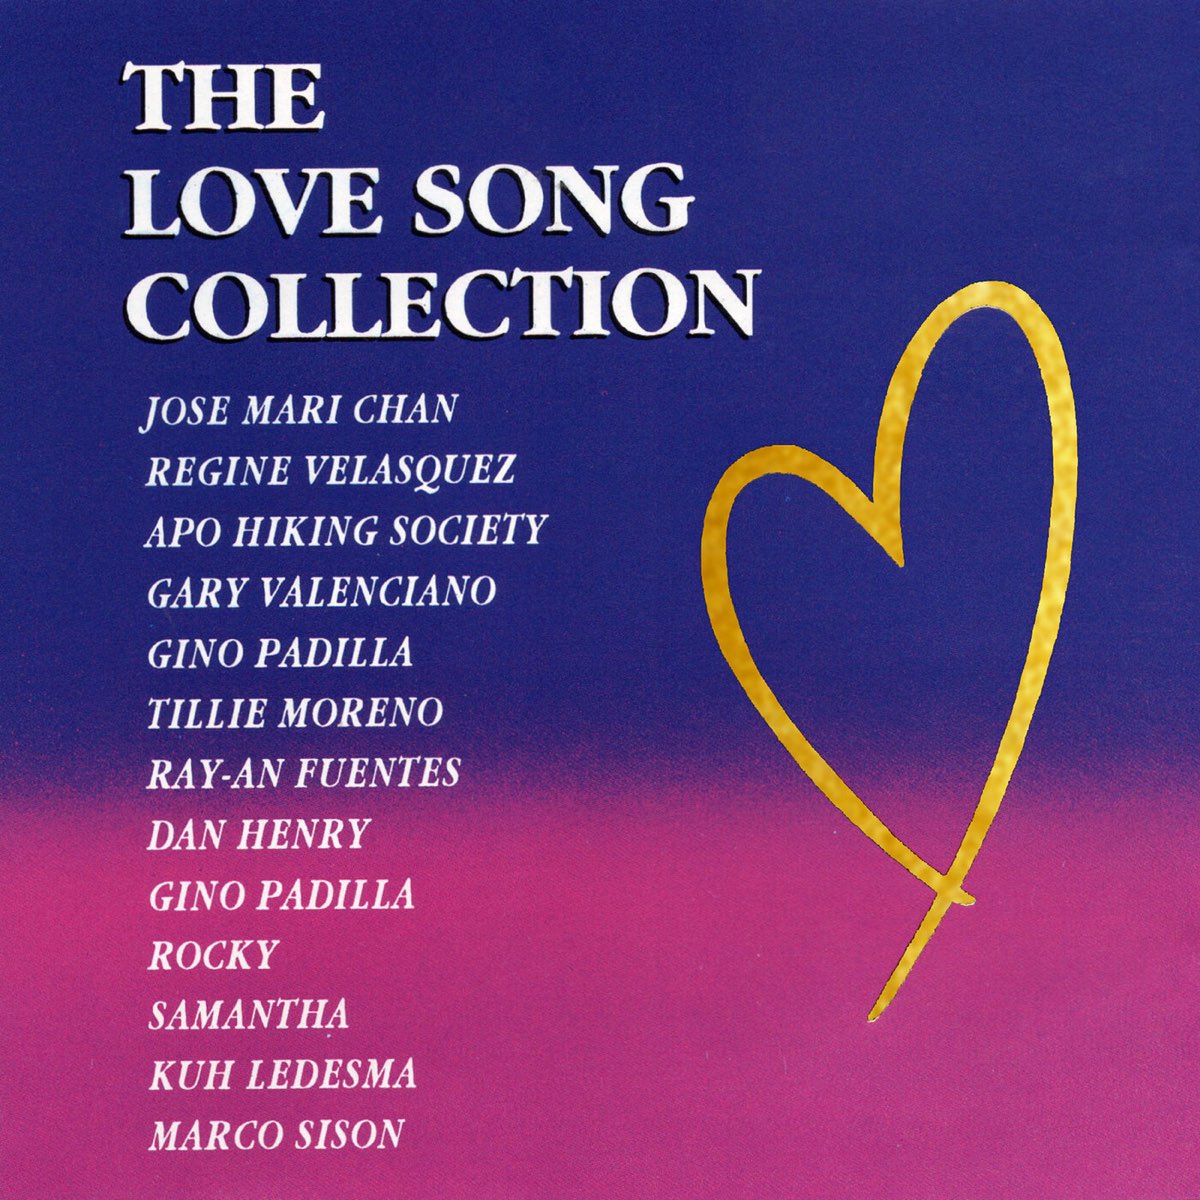 LOVE SONG COLLECTION